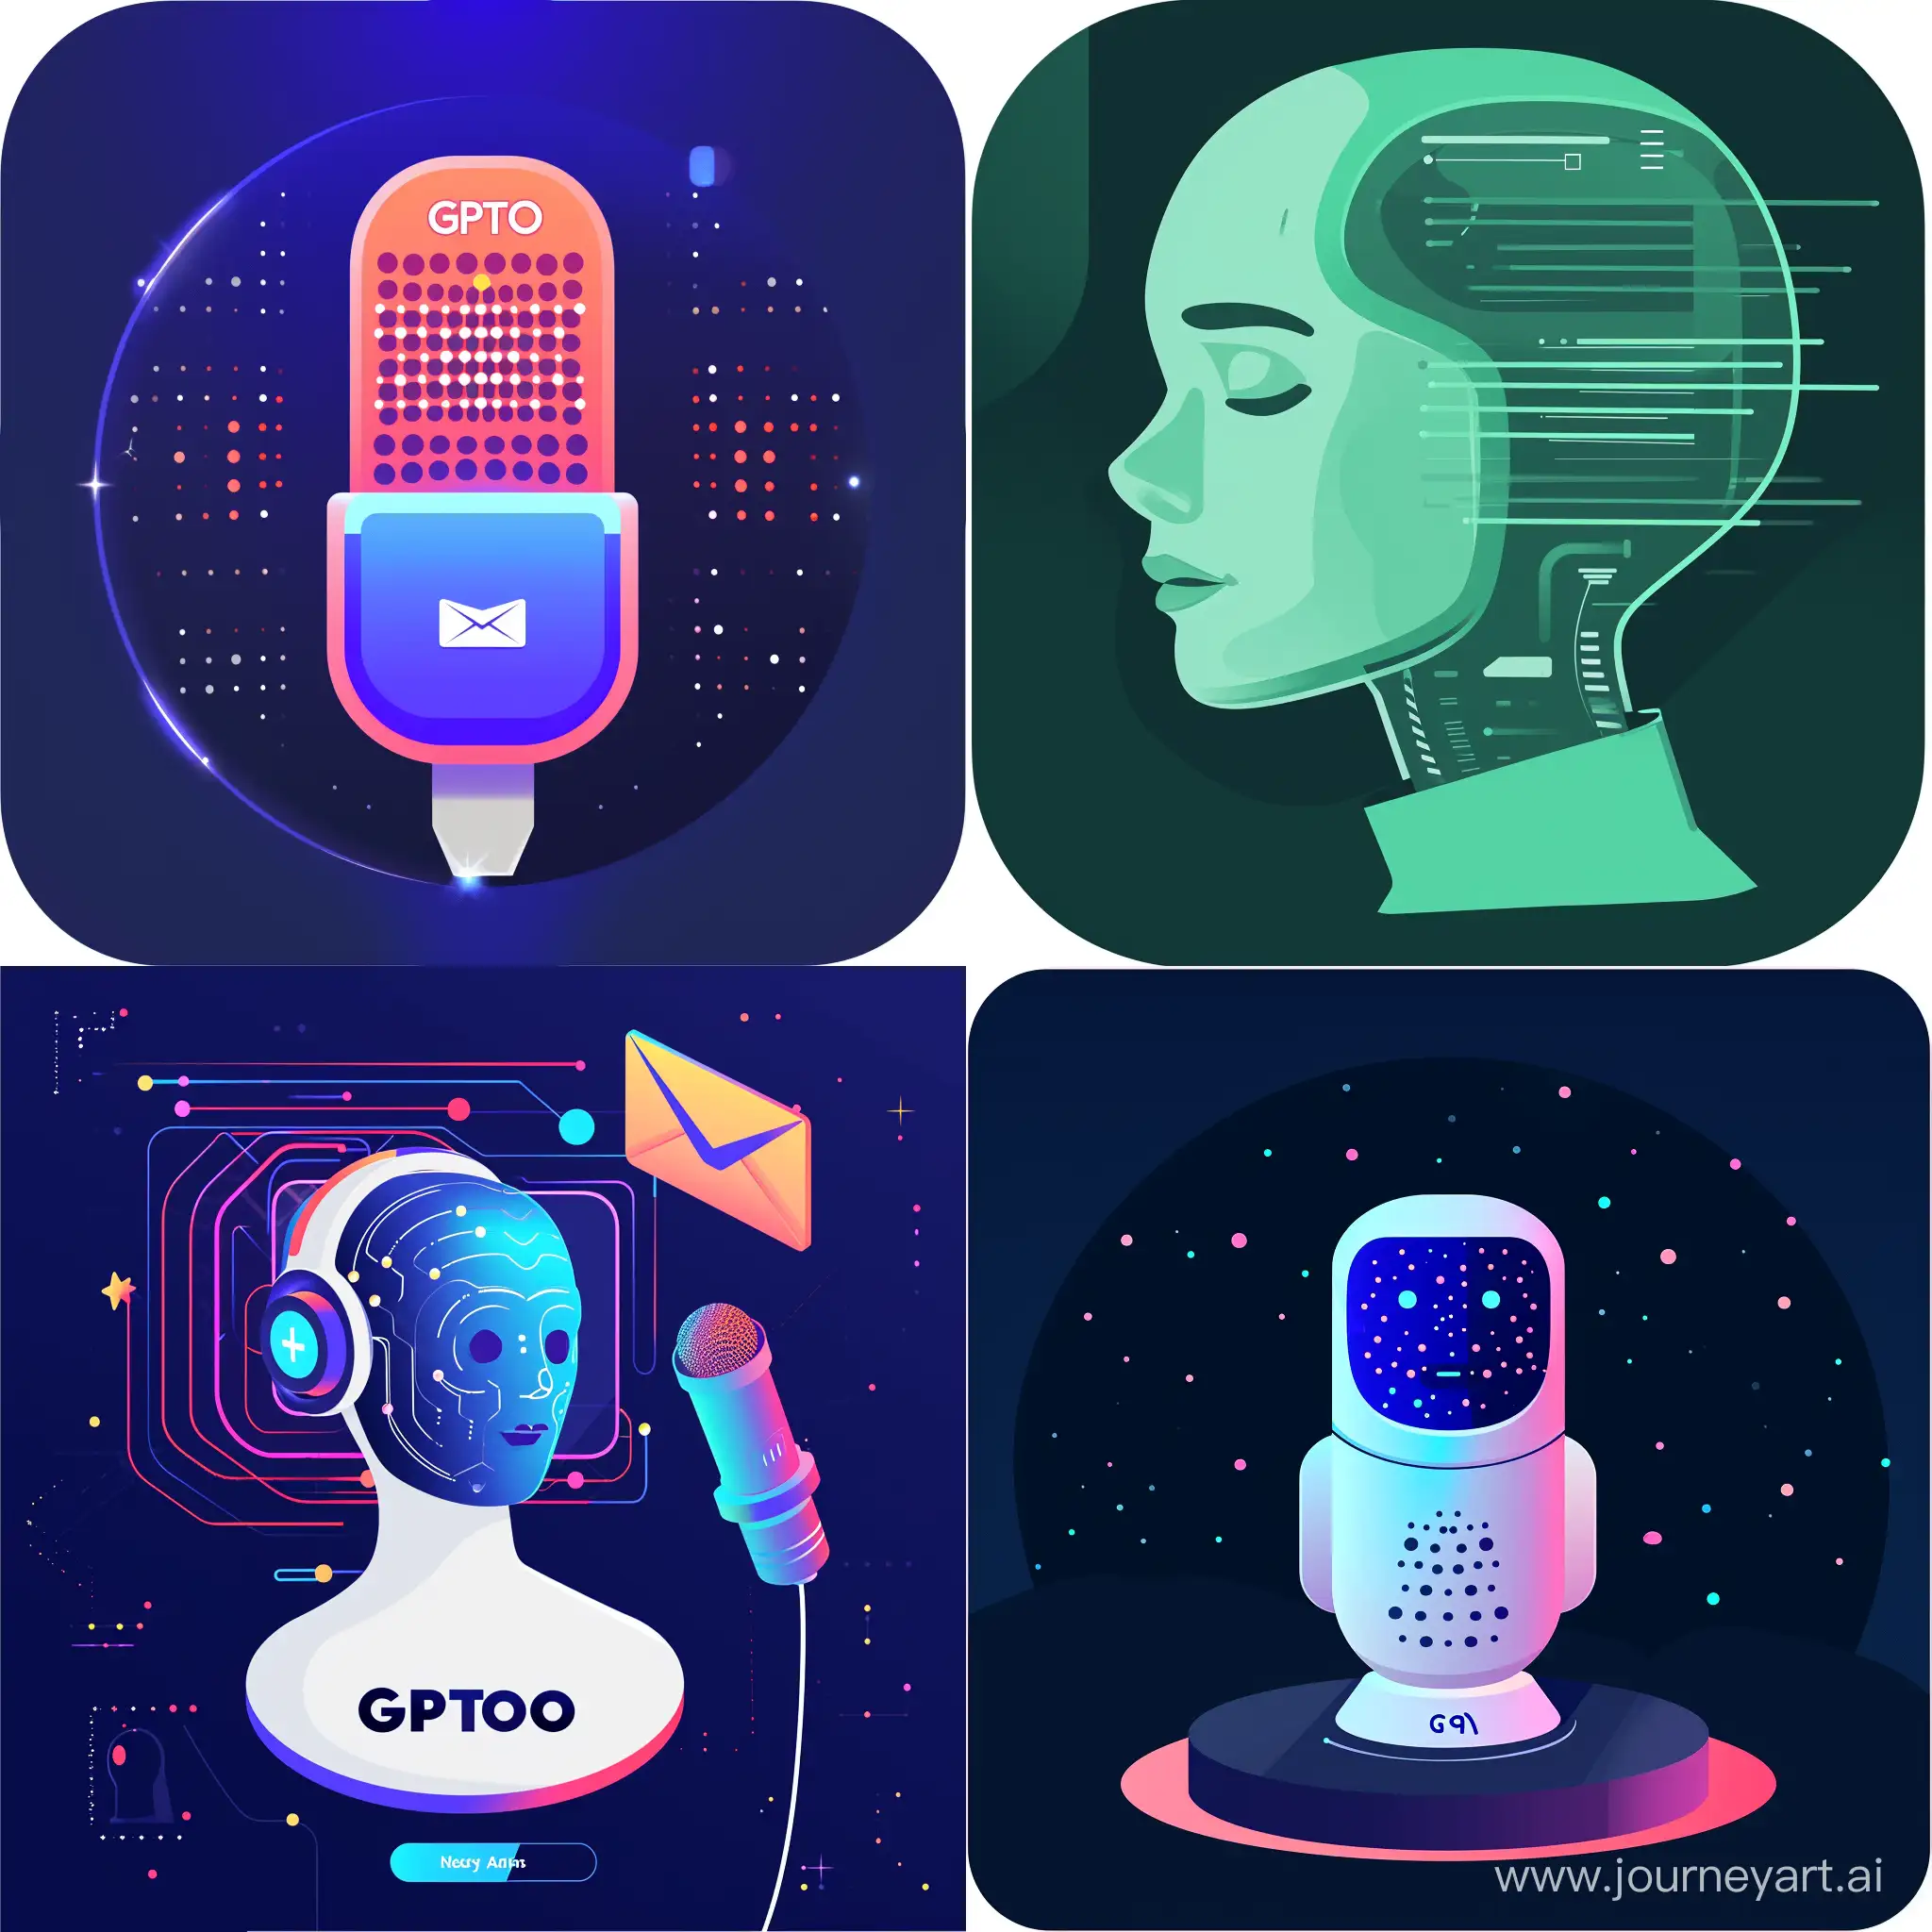 Feature graphic for google play  Short description: GPTOS is an advanced voice assistant app that offers powerful features such as summarizing, rewriting, reading, and auto-responder for emails, using advanced artificial general intelligence (AGI) technology.